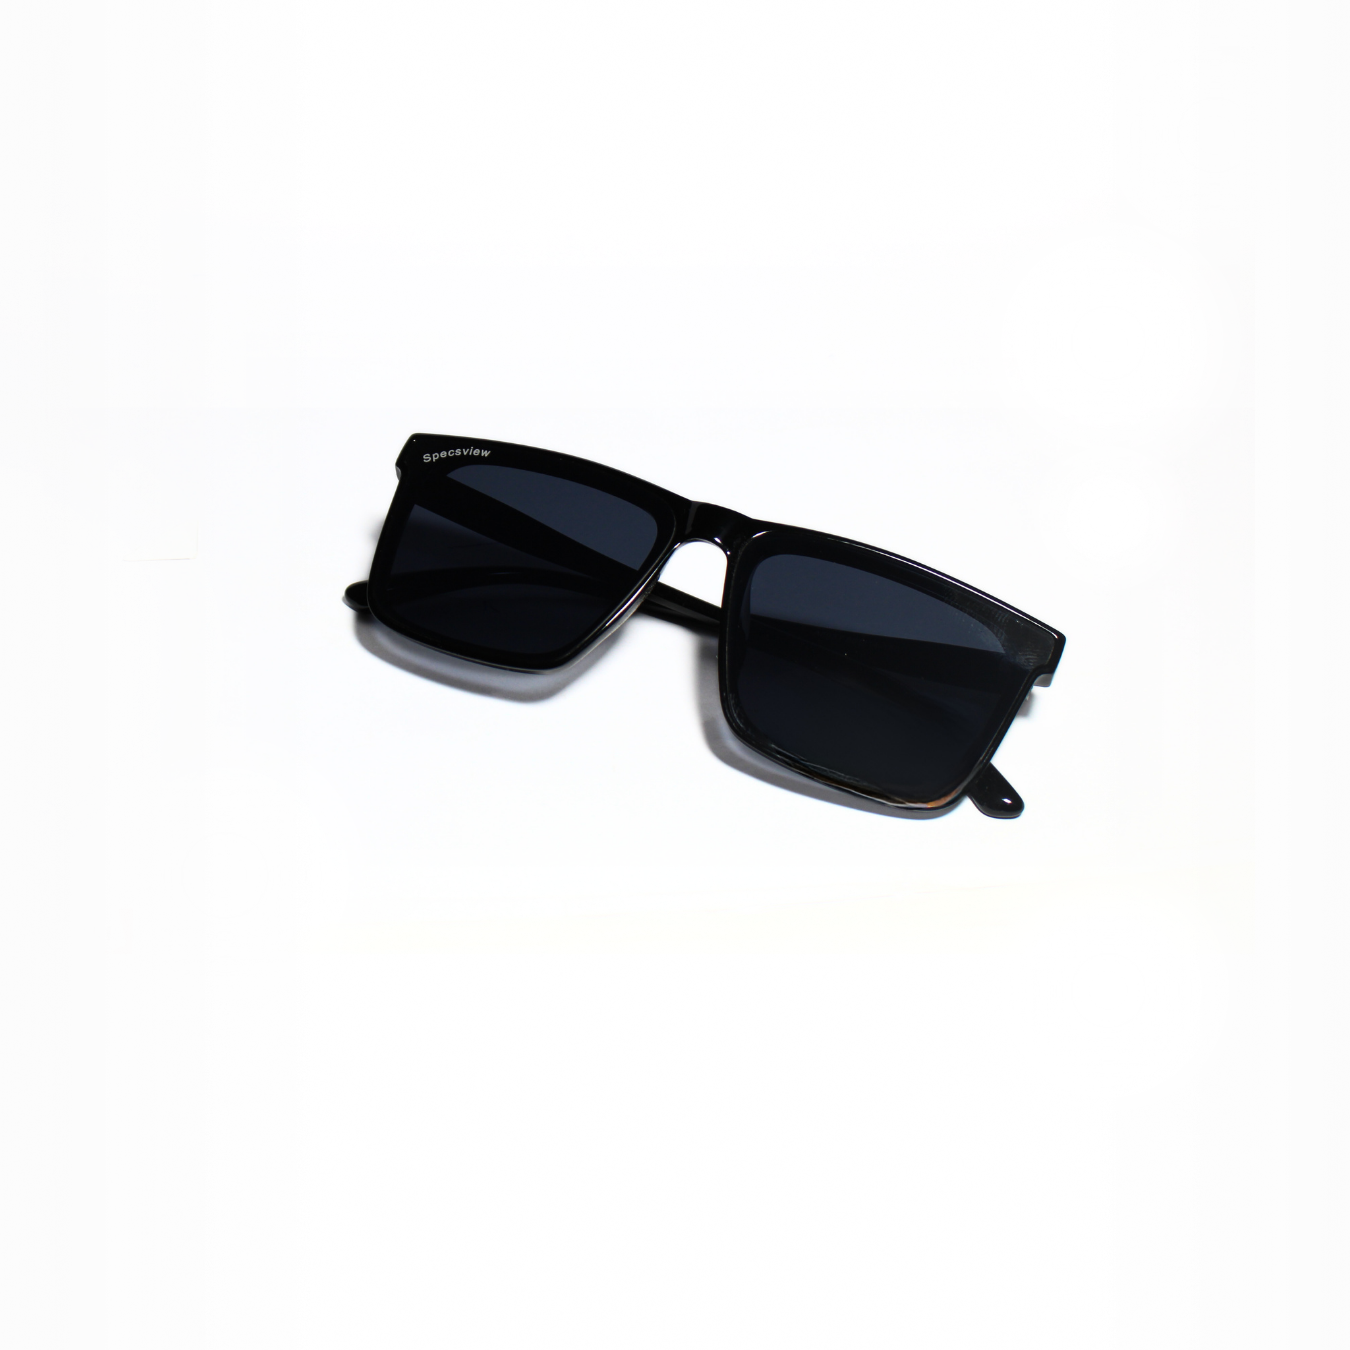 KARL//001 I Sunglasses for Men and Women - Specsview